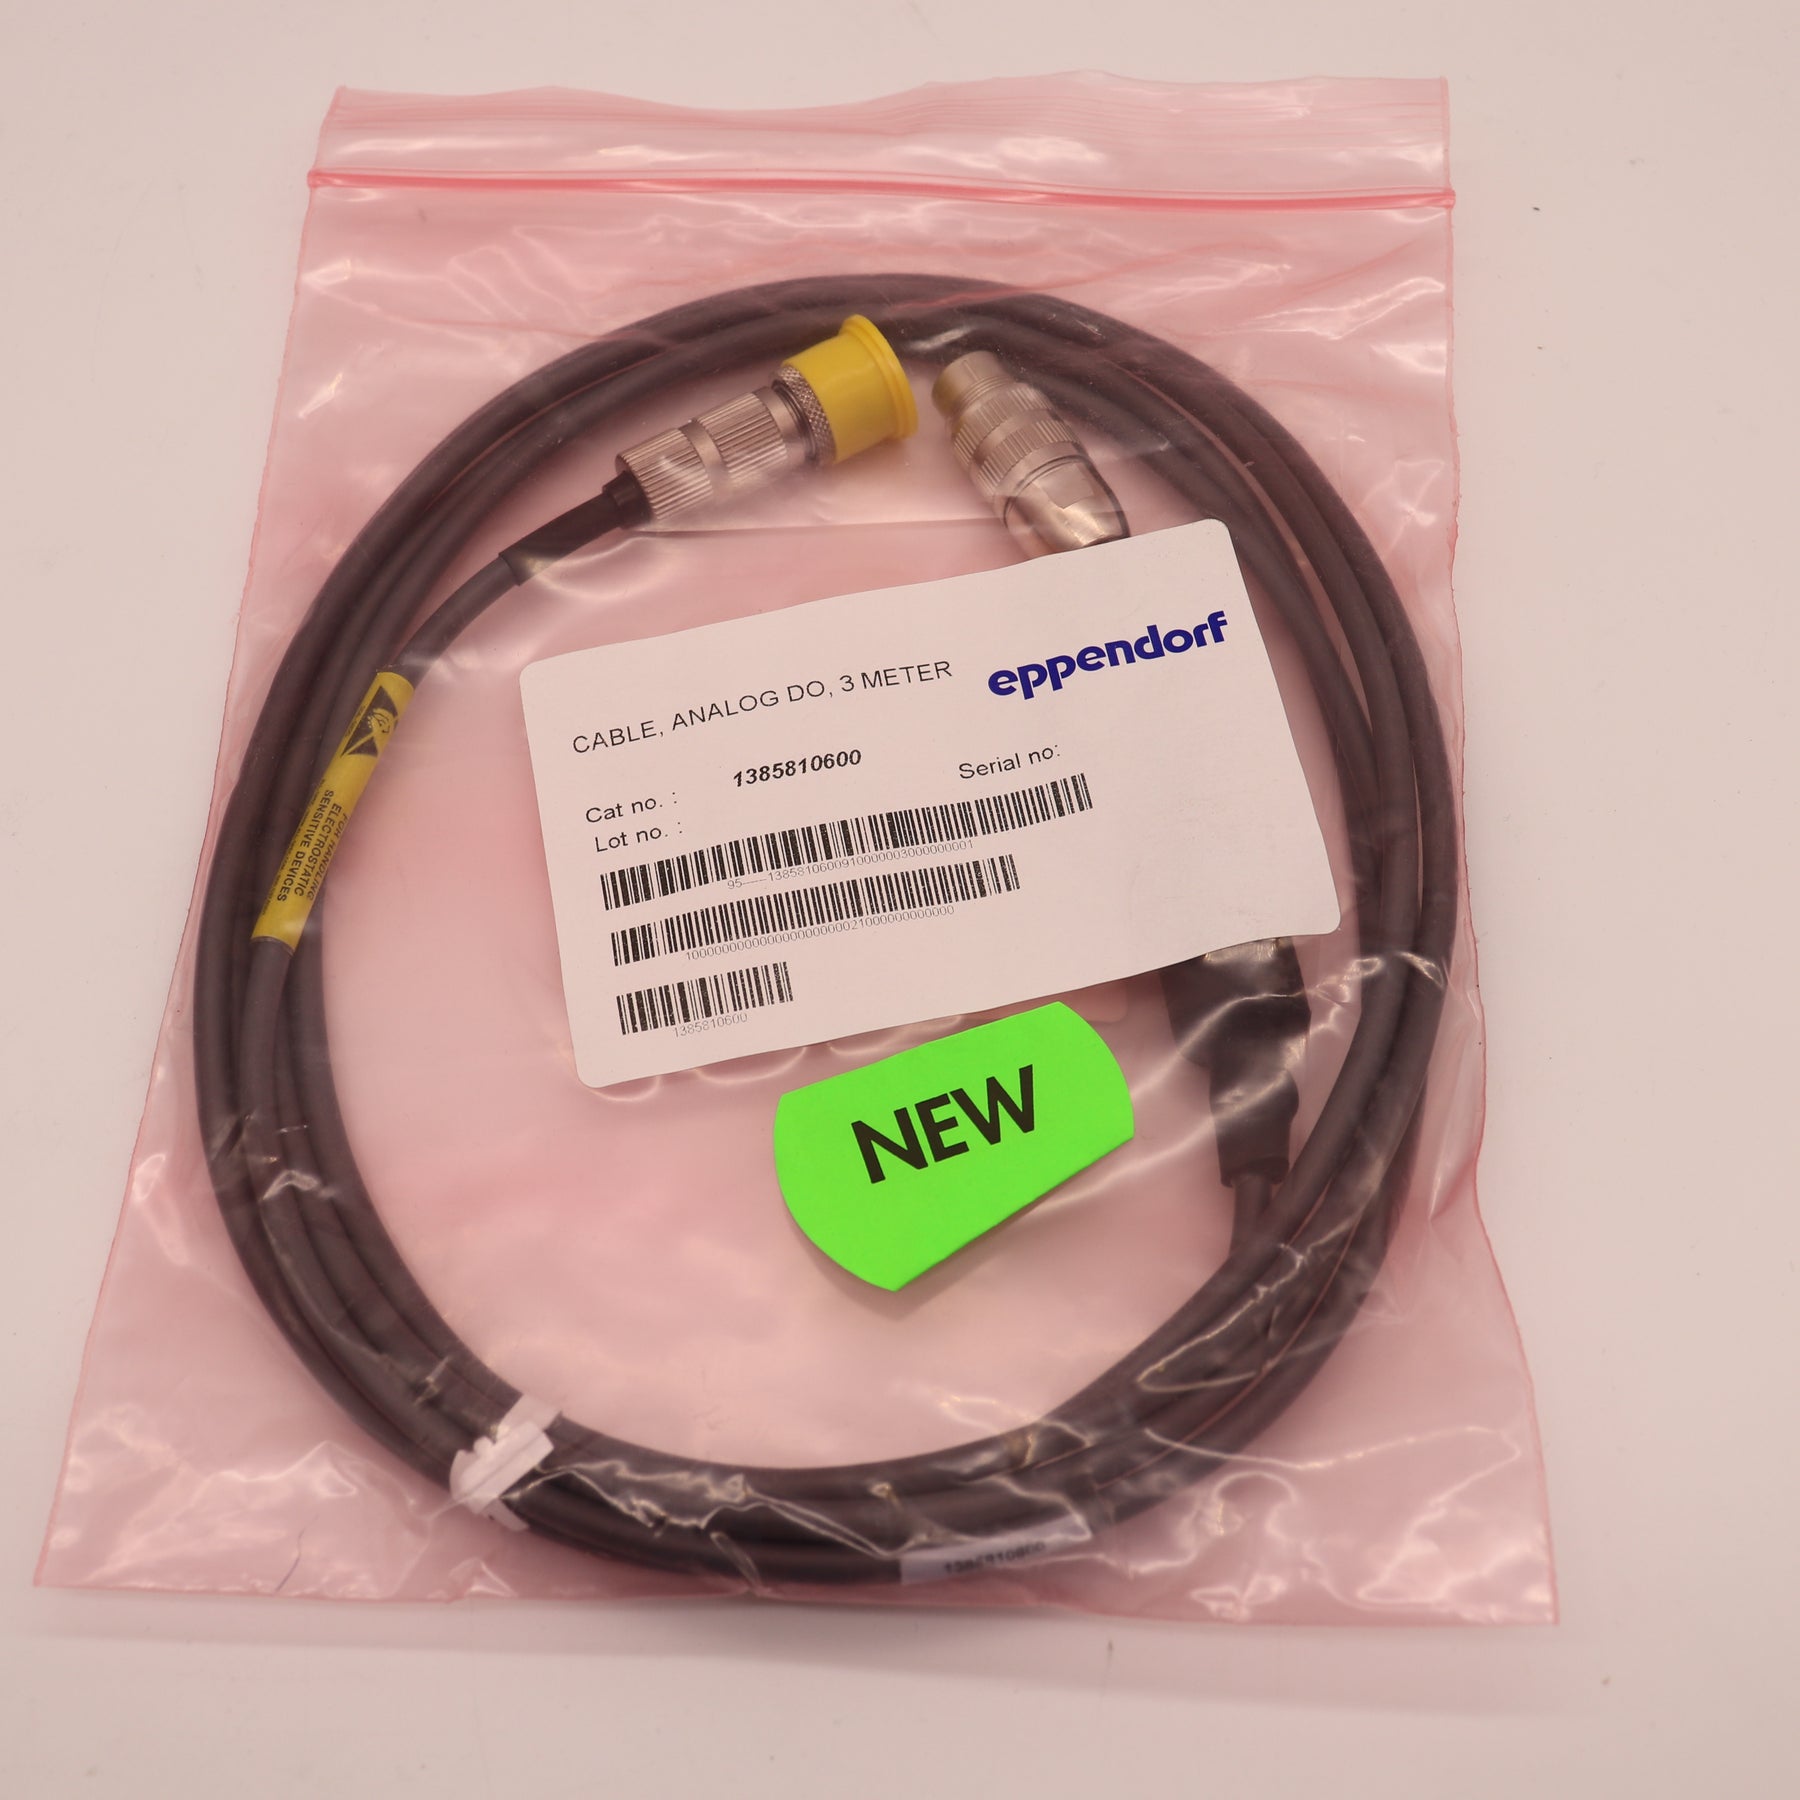 Eppendorf Analog DO Cable 3 Meters 1385810600